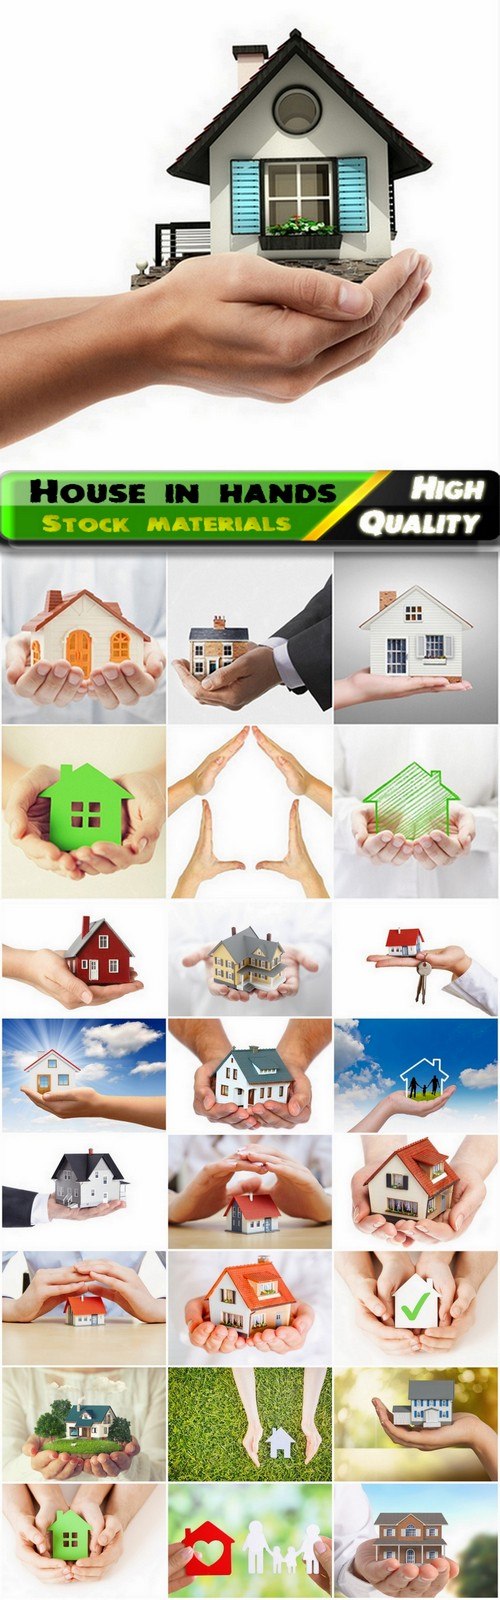 Trade in real estate and house in hands - 25 HQ Jpg